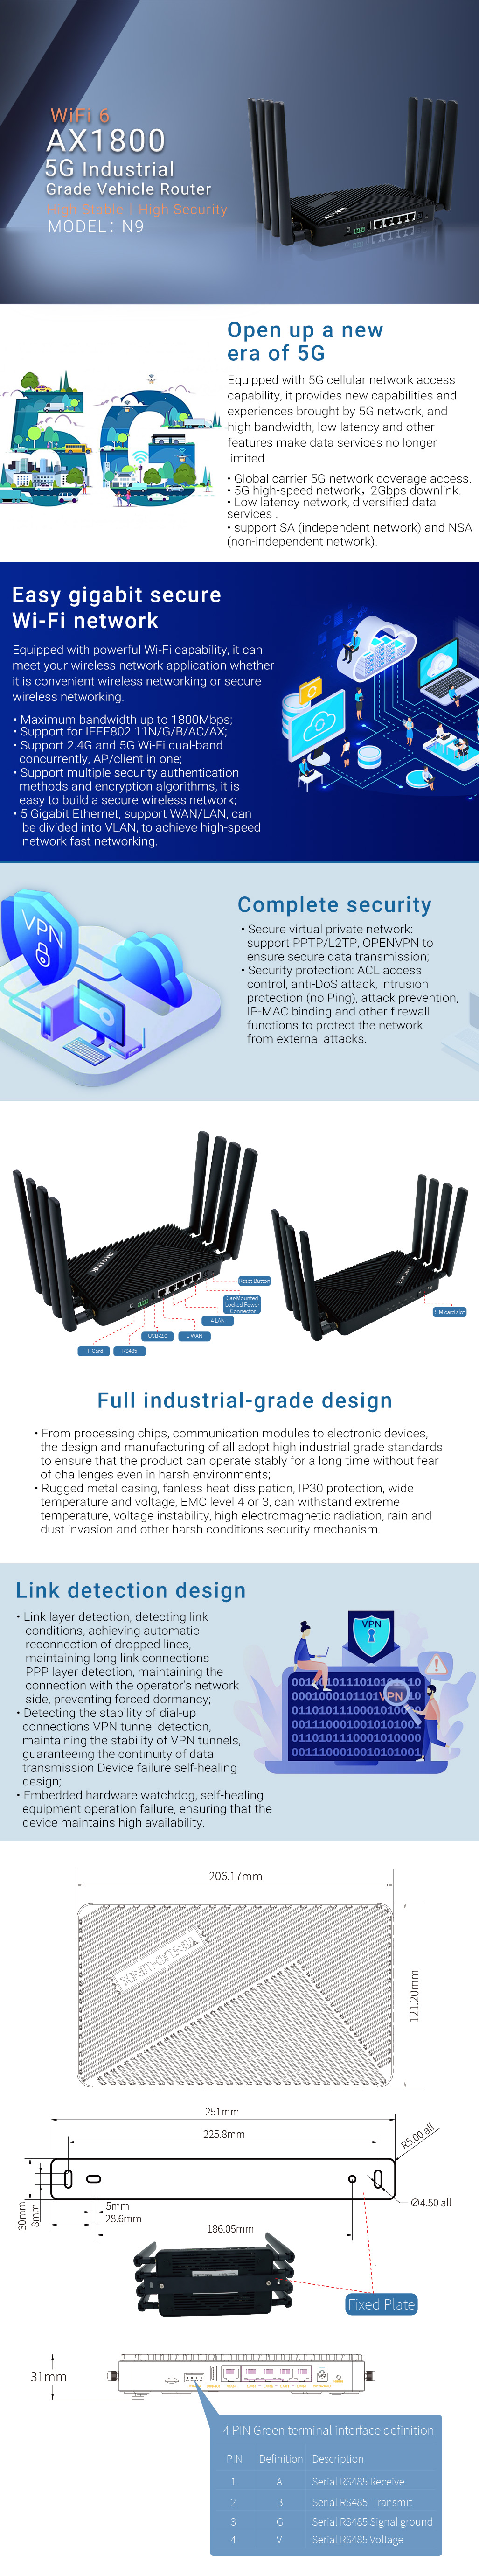 N9 AX1800 Industrial Grade 5G Vehicle Router